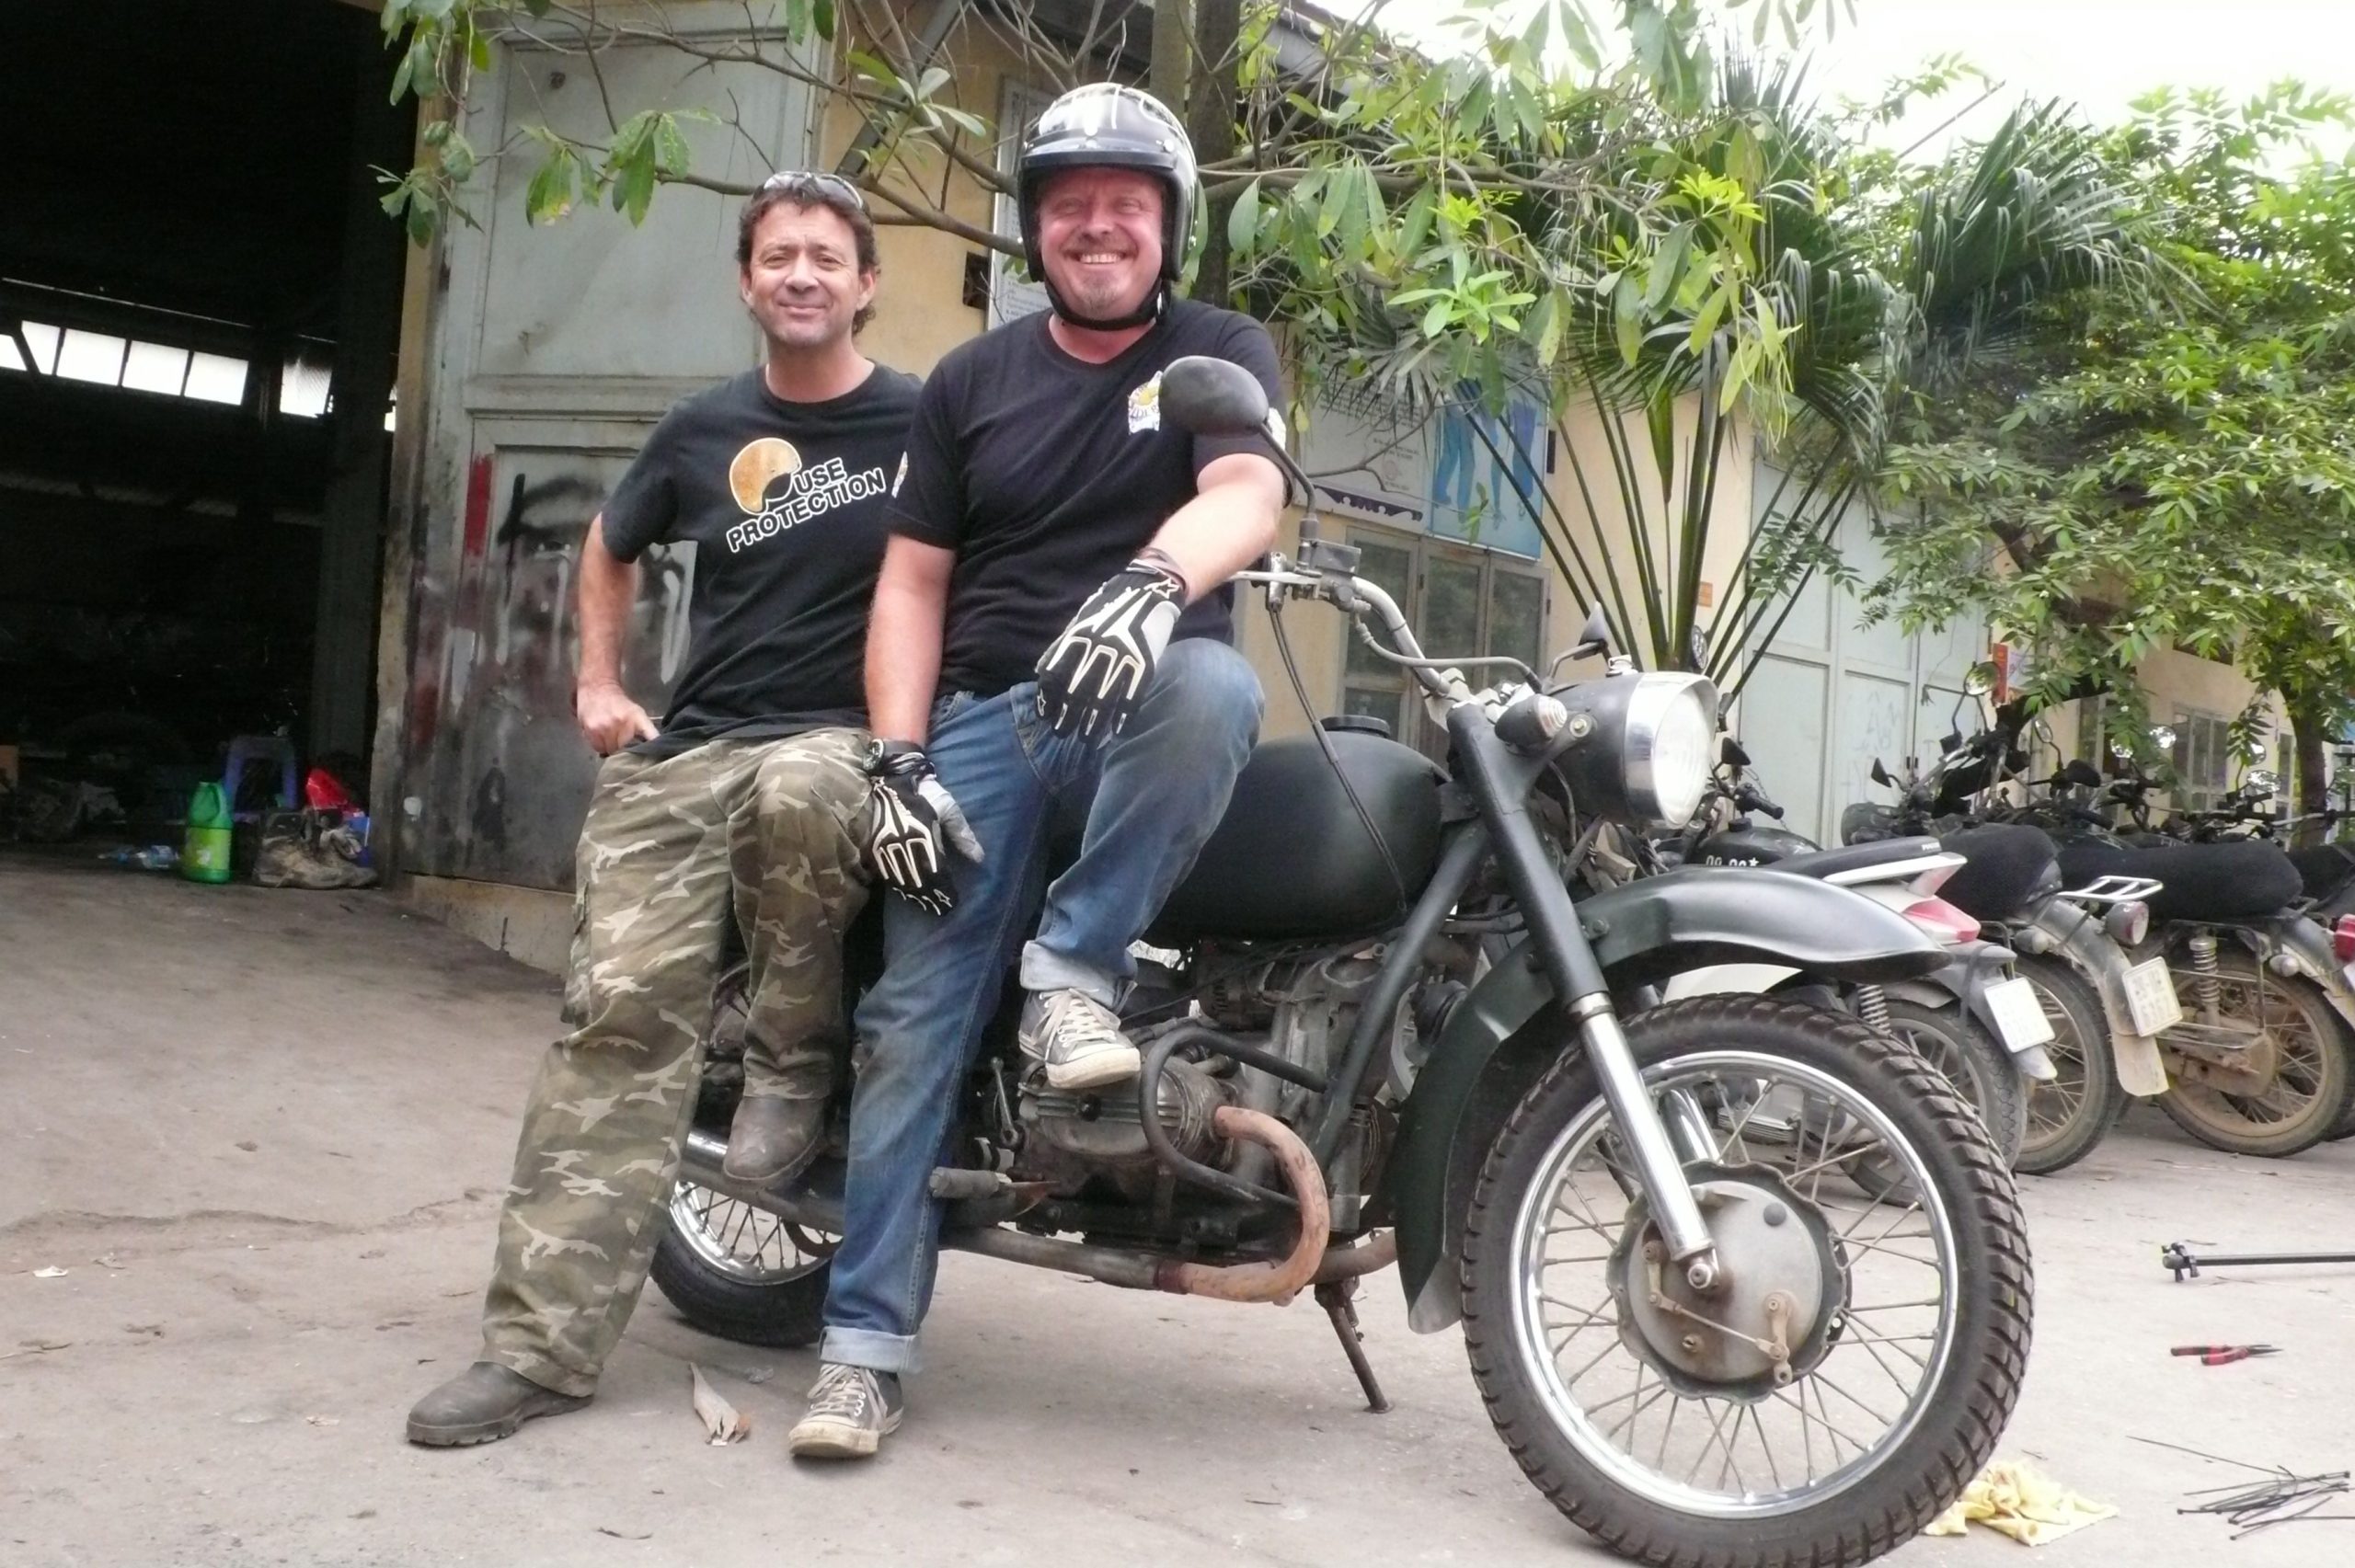 Charley Boorman and Digby on a Ural motorcycle